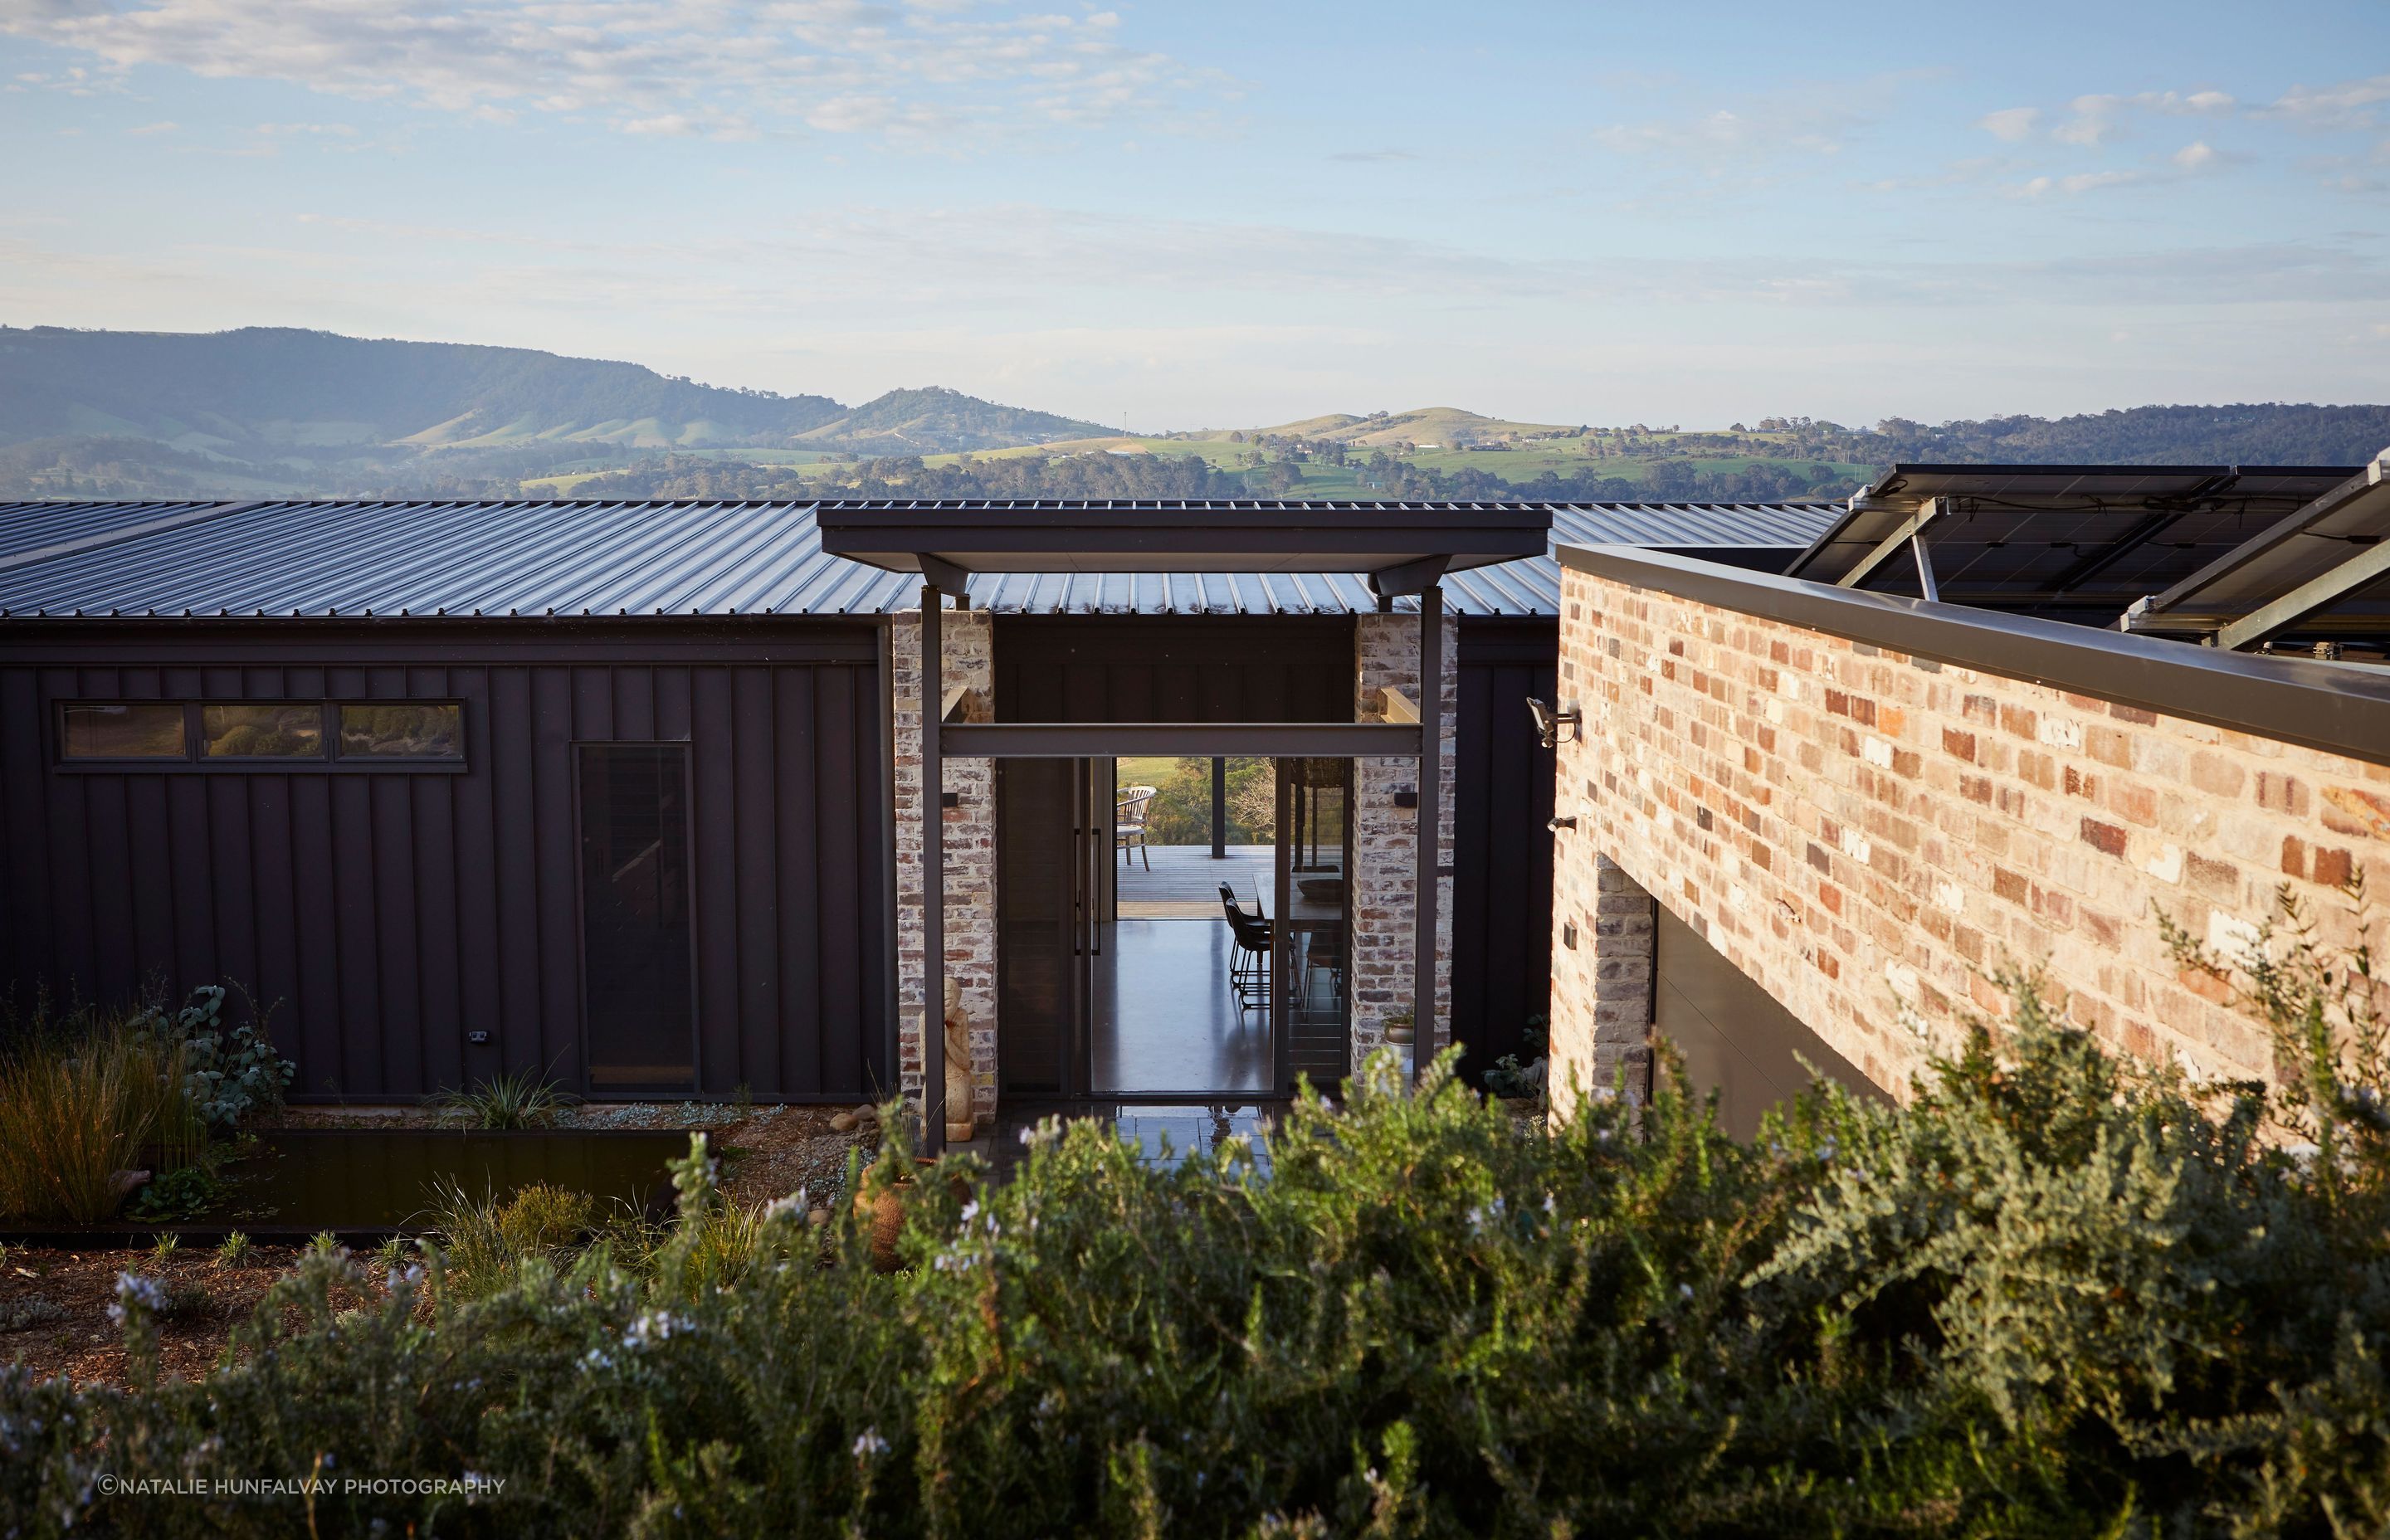 Solidified in black cladding and recycled brick to reflect the home’s surrounding grounds and uninterrupted views.